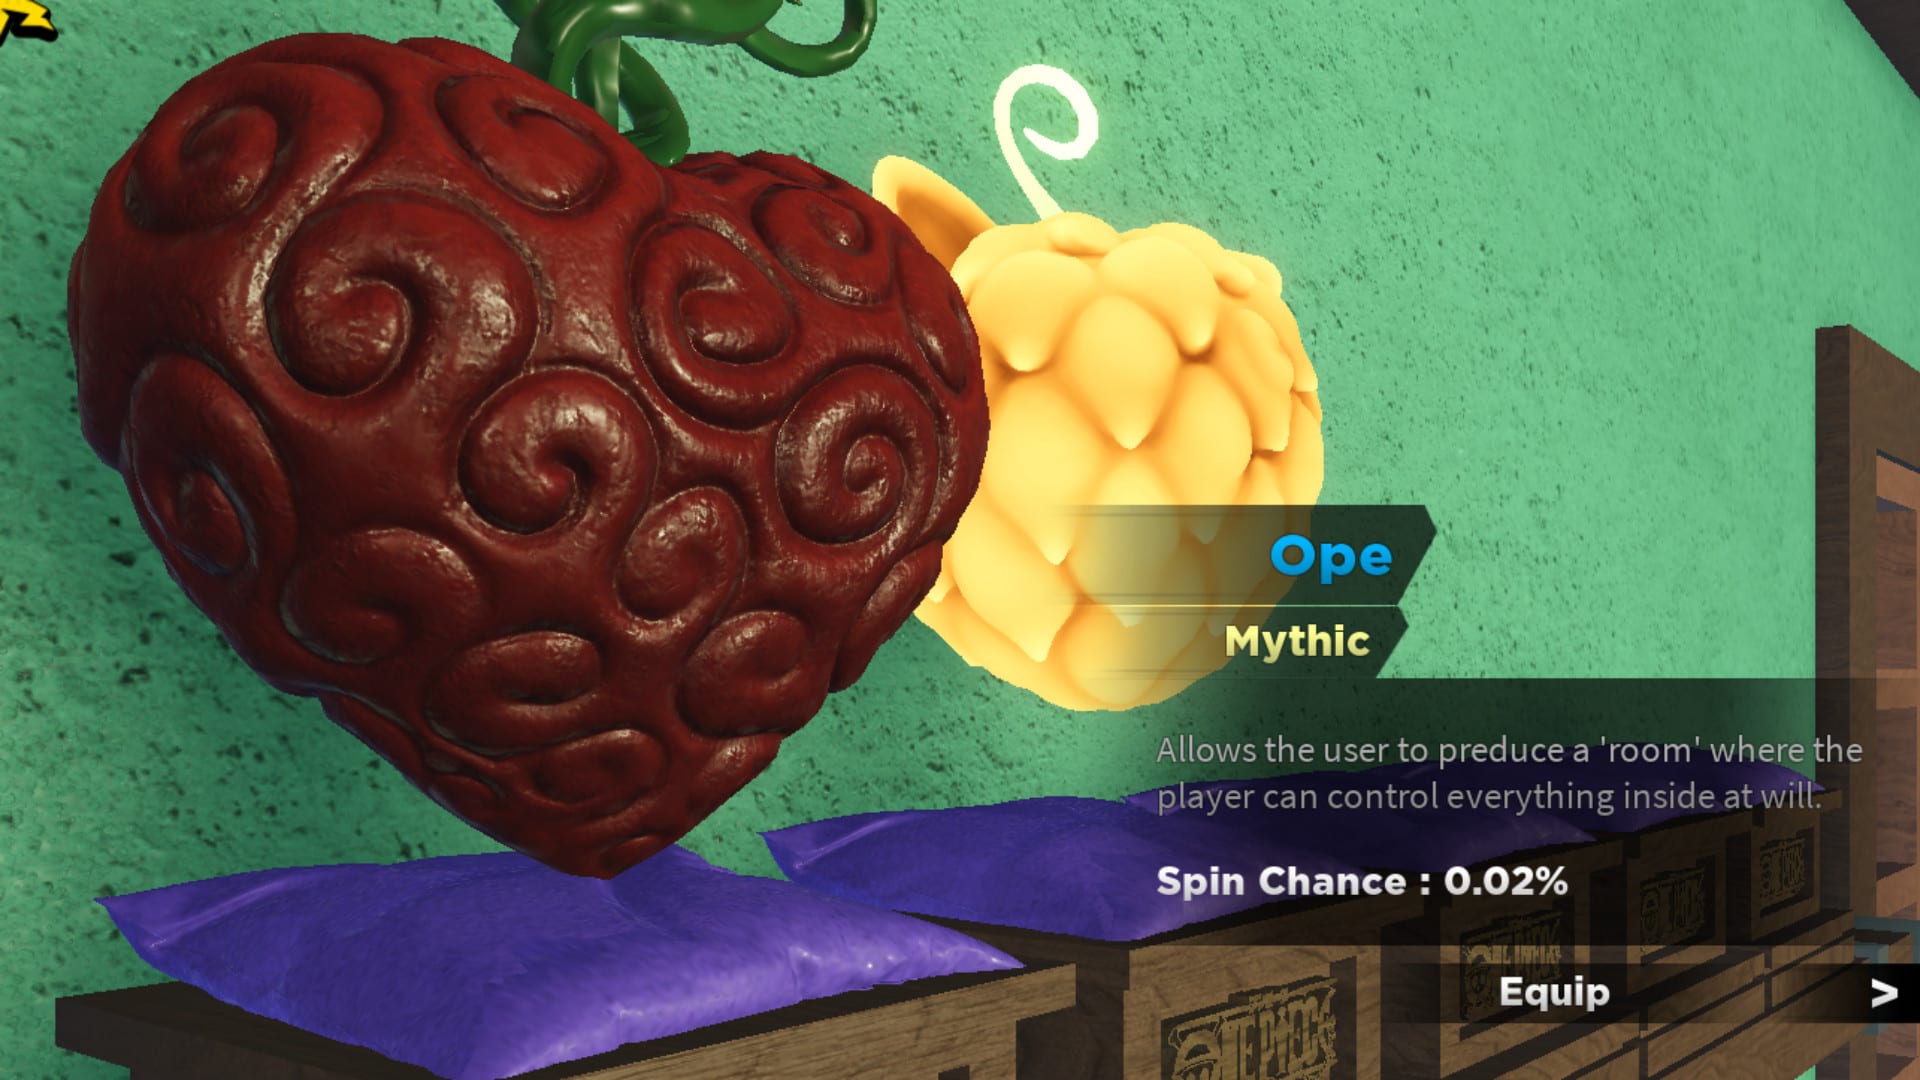 Give a legendary or mythical fruit in fruit battlegrounds by Olha1213